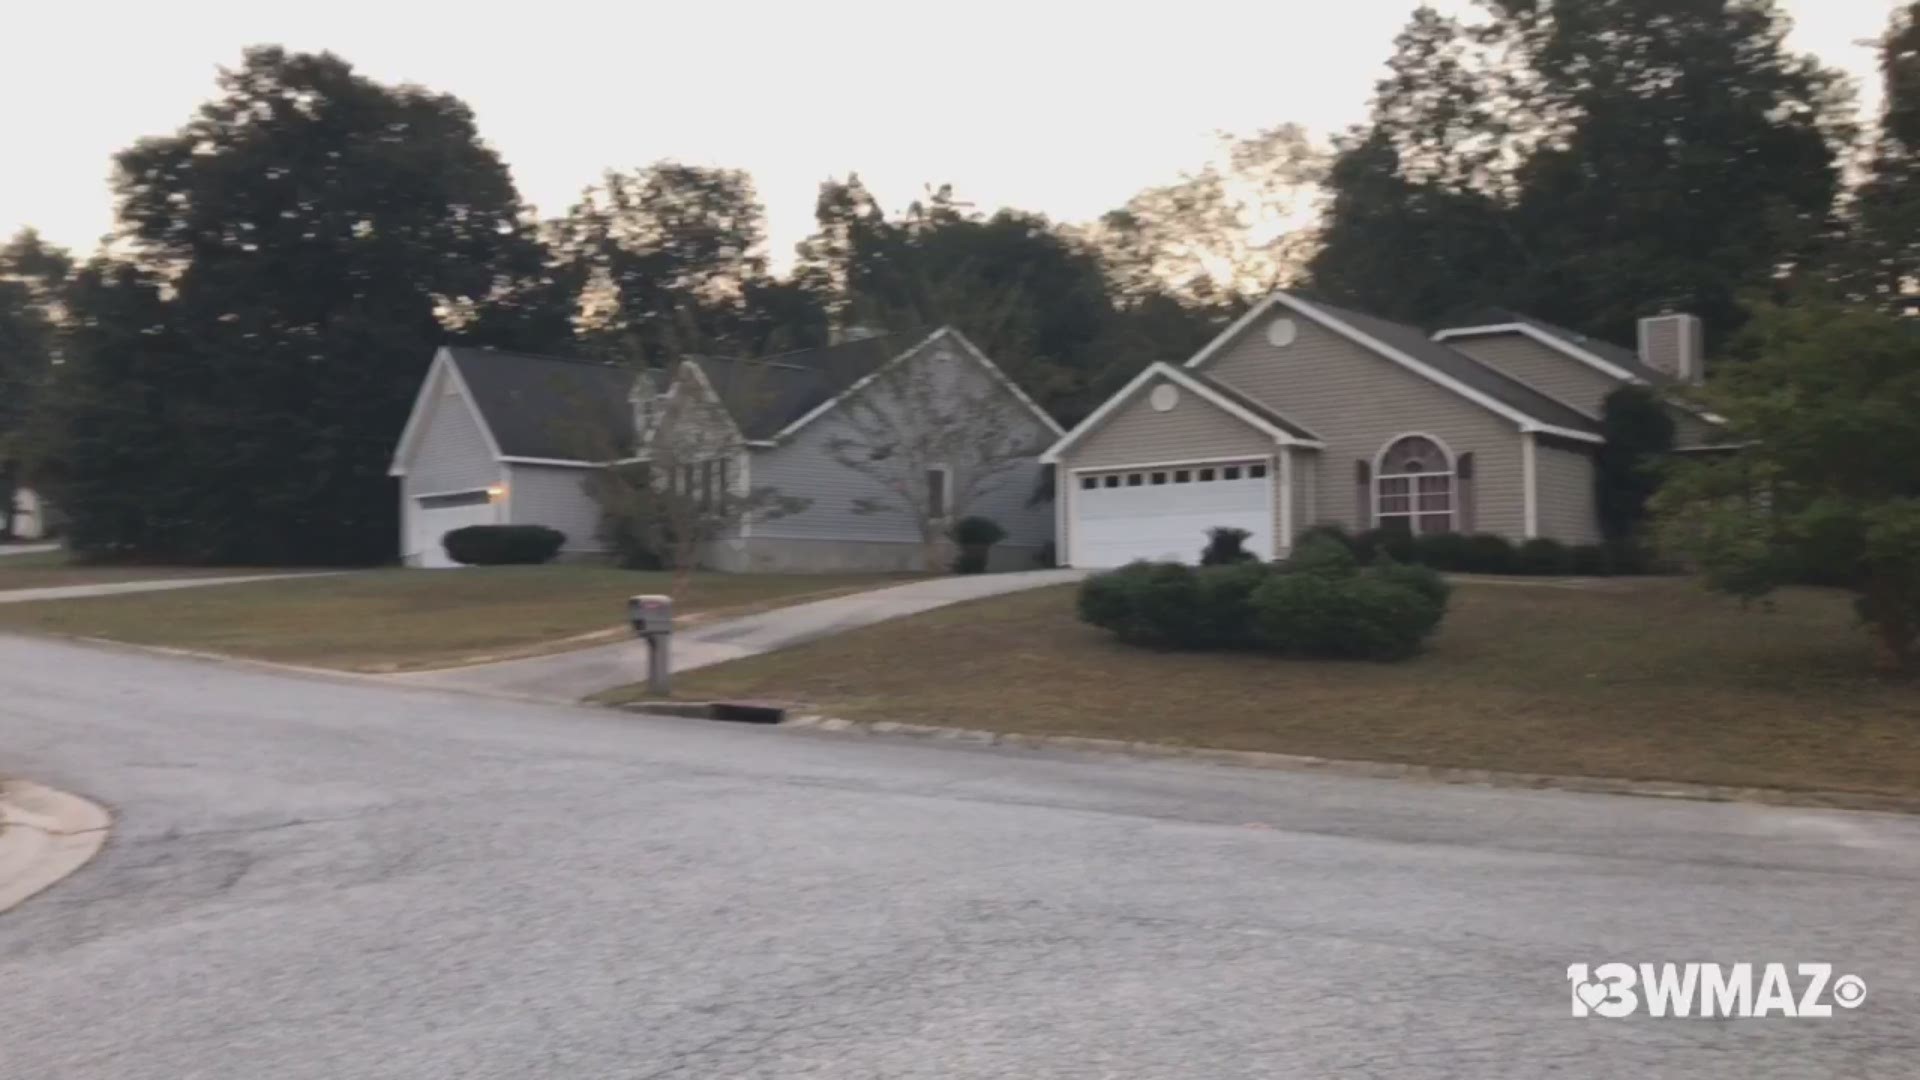 The Bibb County Sheriff's Office says it happened Tuesday night. An unknown suspect shot into her home as she was heading to bed with family.